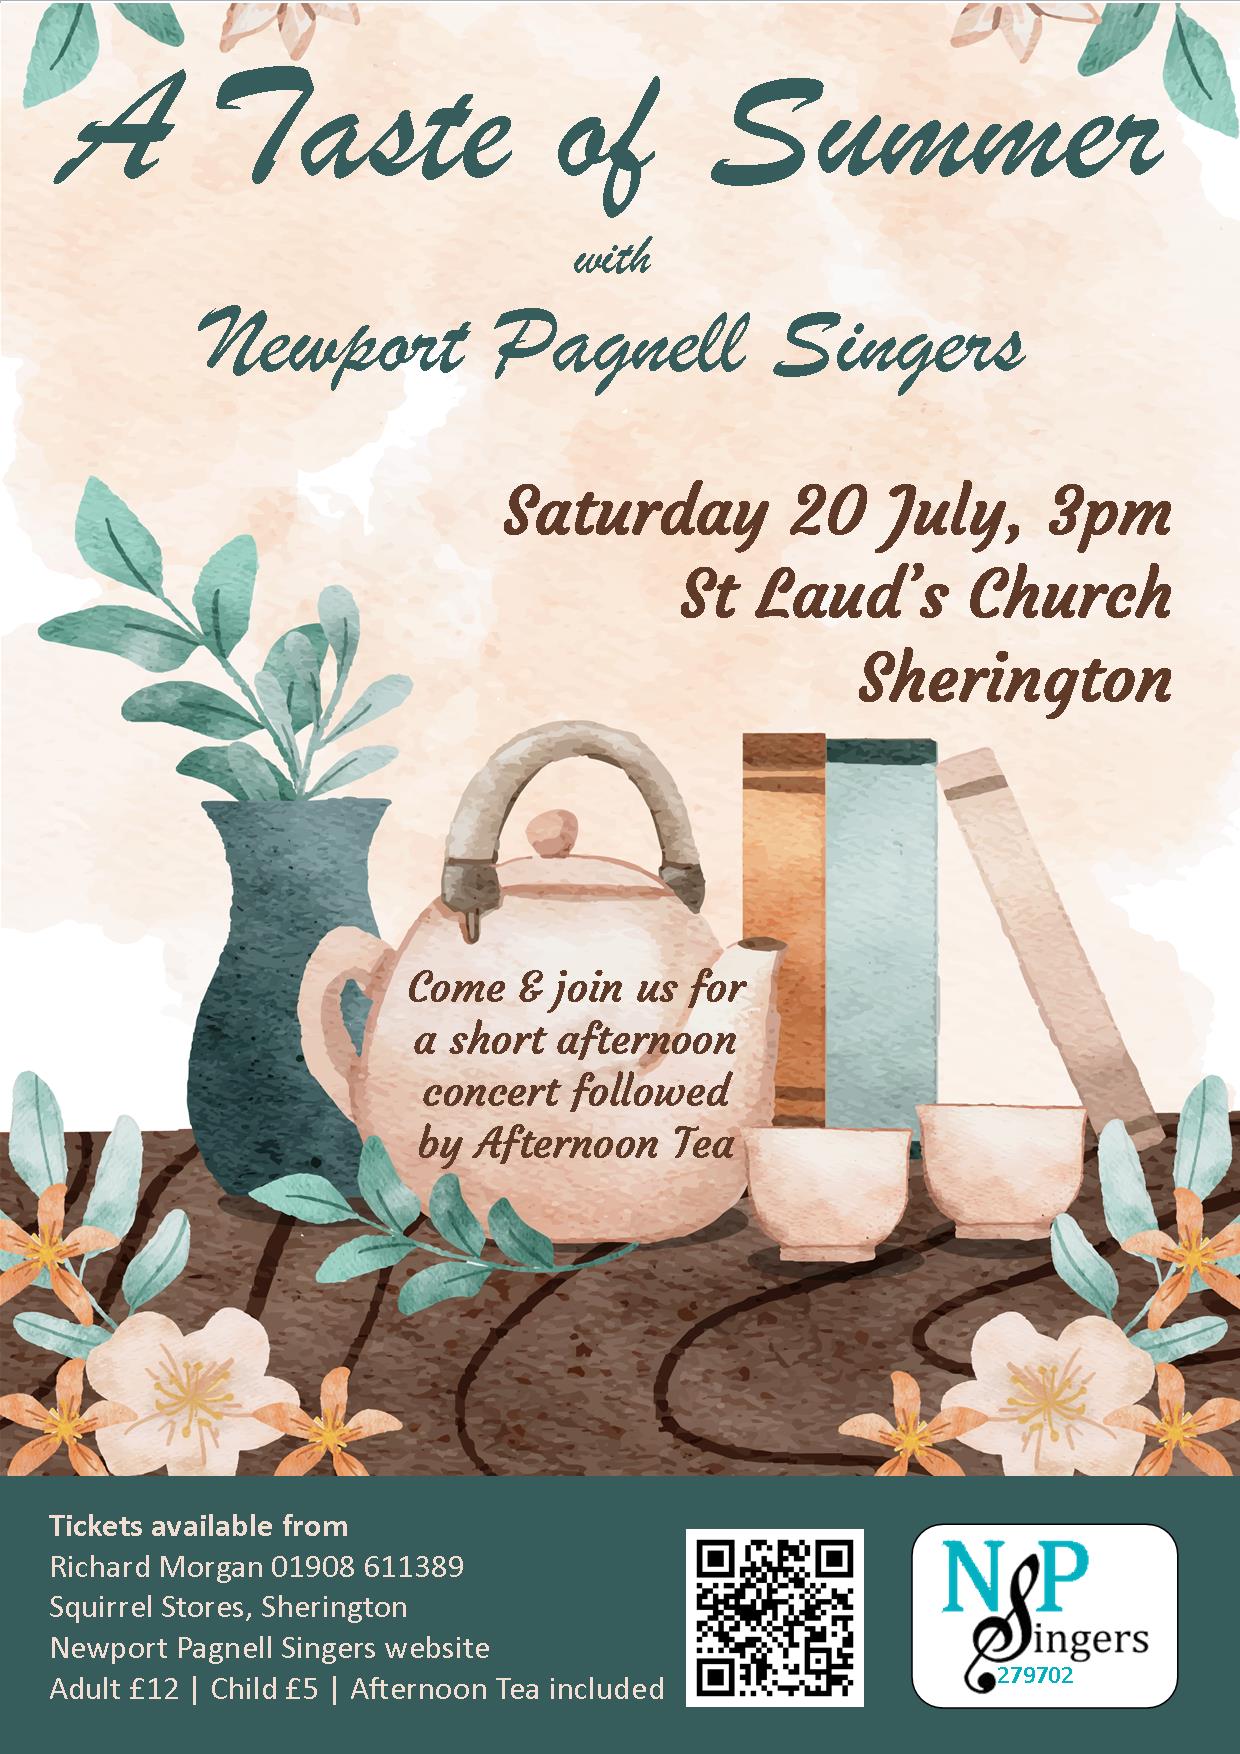 A Taste of Summer with Newport Pagnell Singers. Saturday 20 July at 3pm at St Laud's Church in Sherington